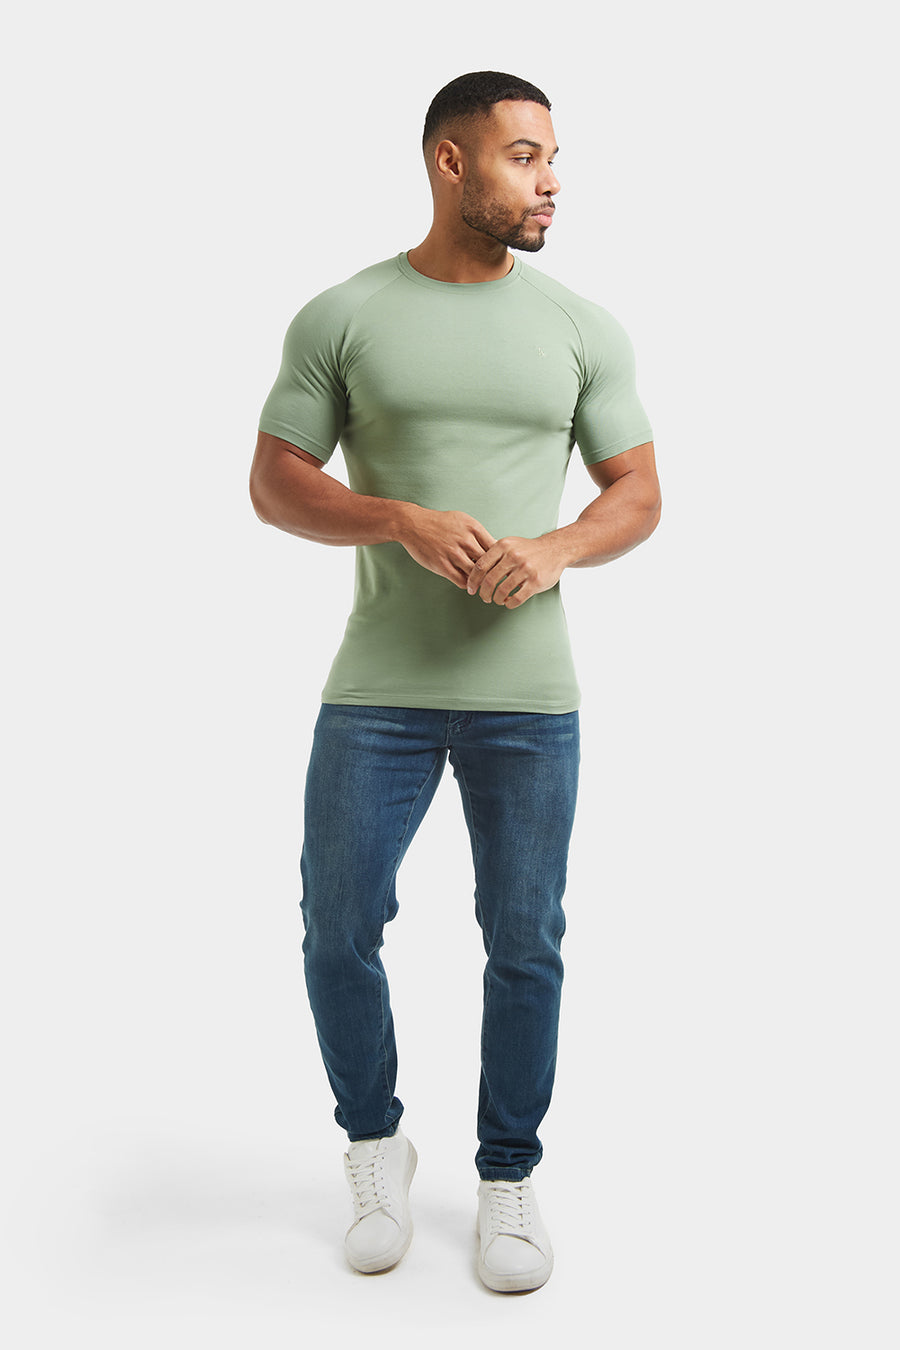 Fashion Fit T-Shirt in Grey Marl - TAILORED ATHLETE - USA